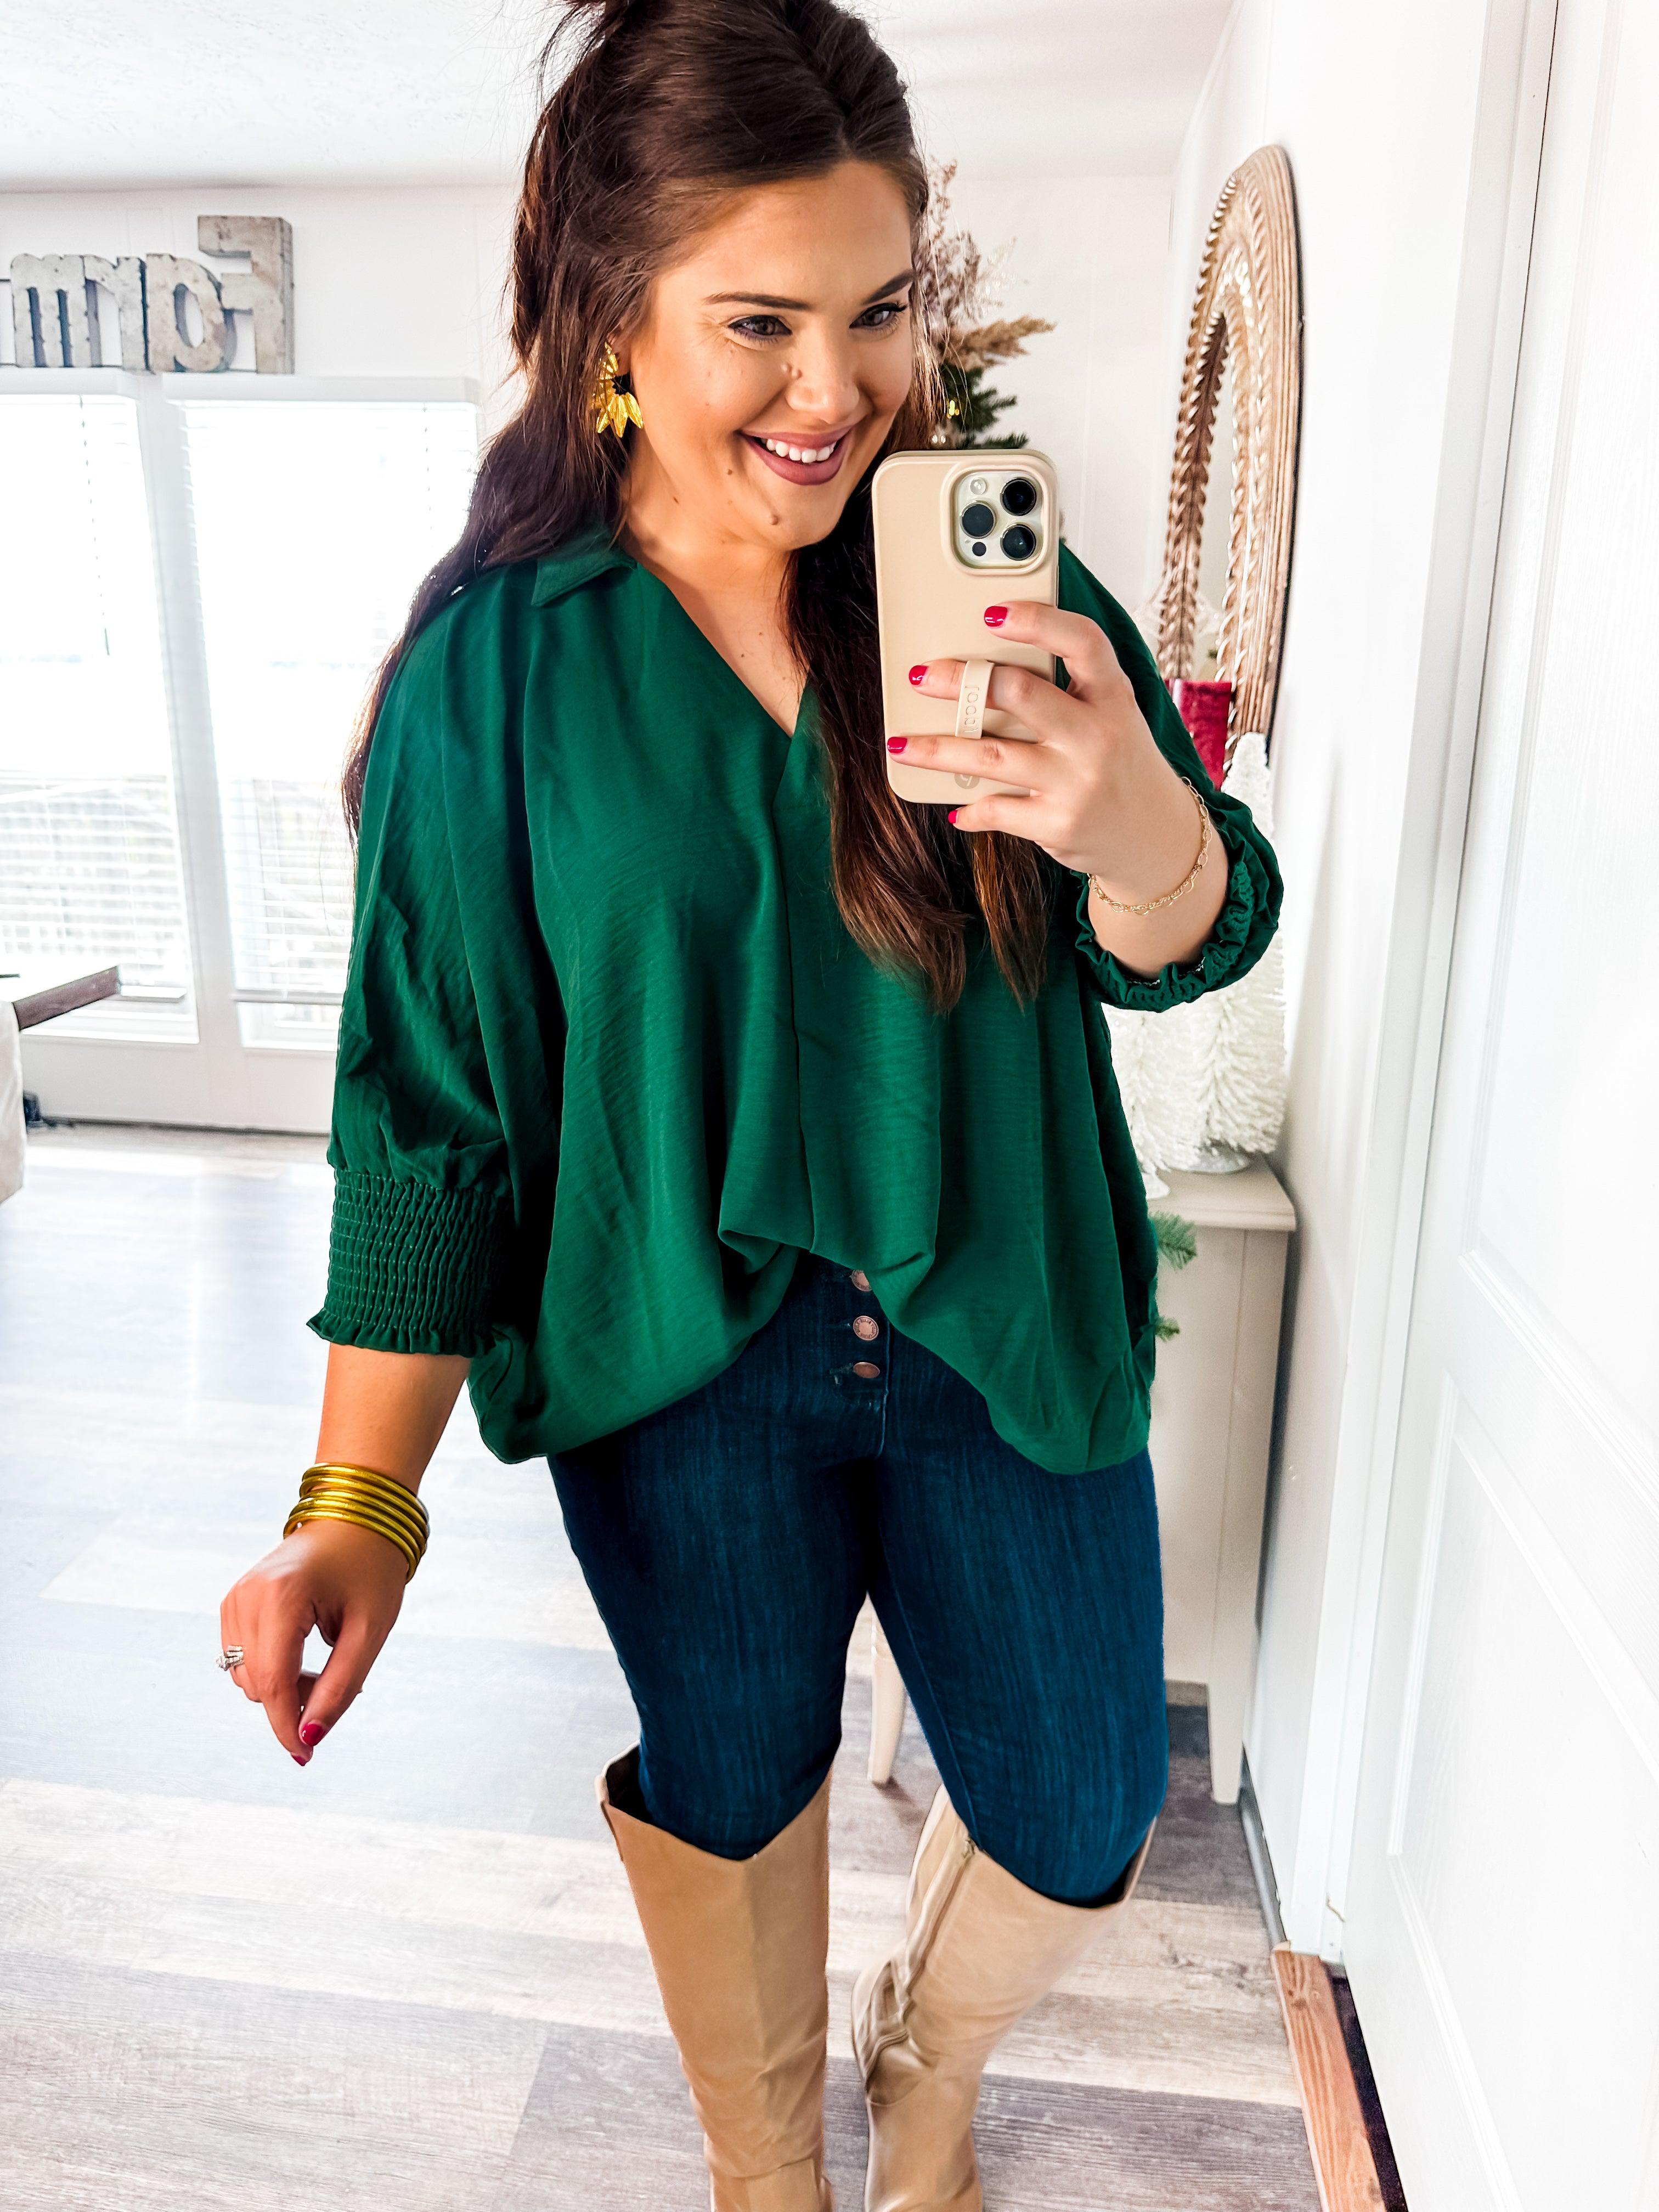 Give Cheers Blouse in Green-Umgee-Trendsetter Online Boutique